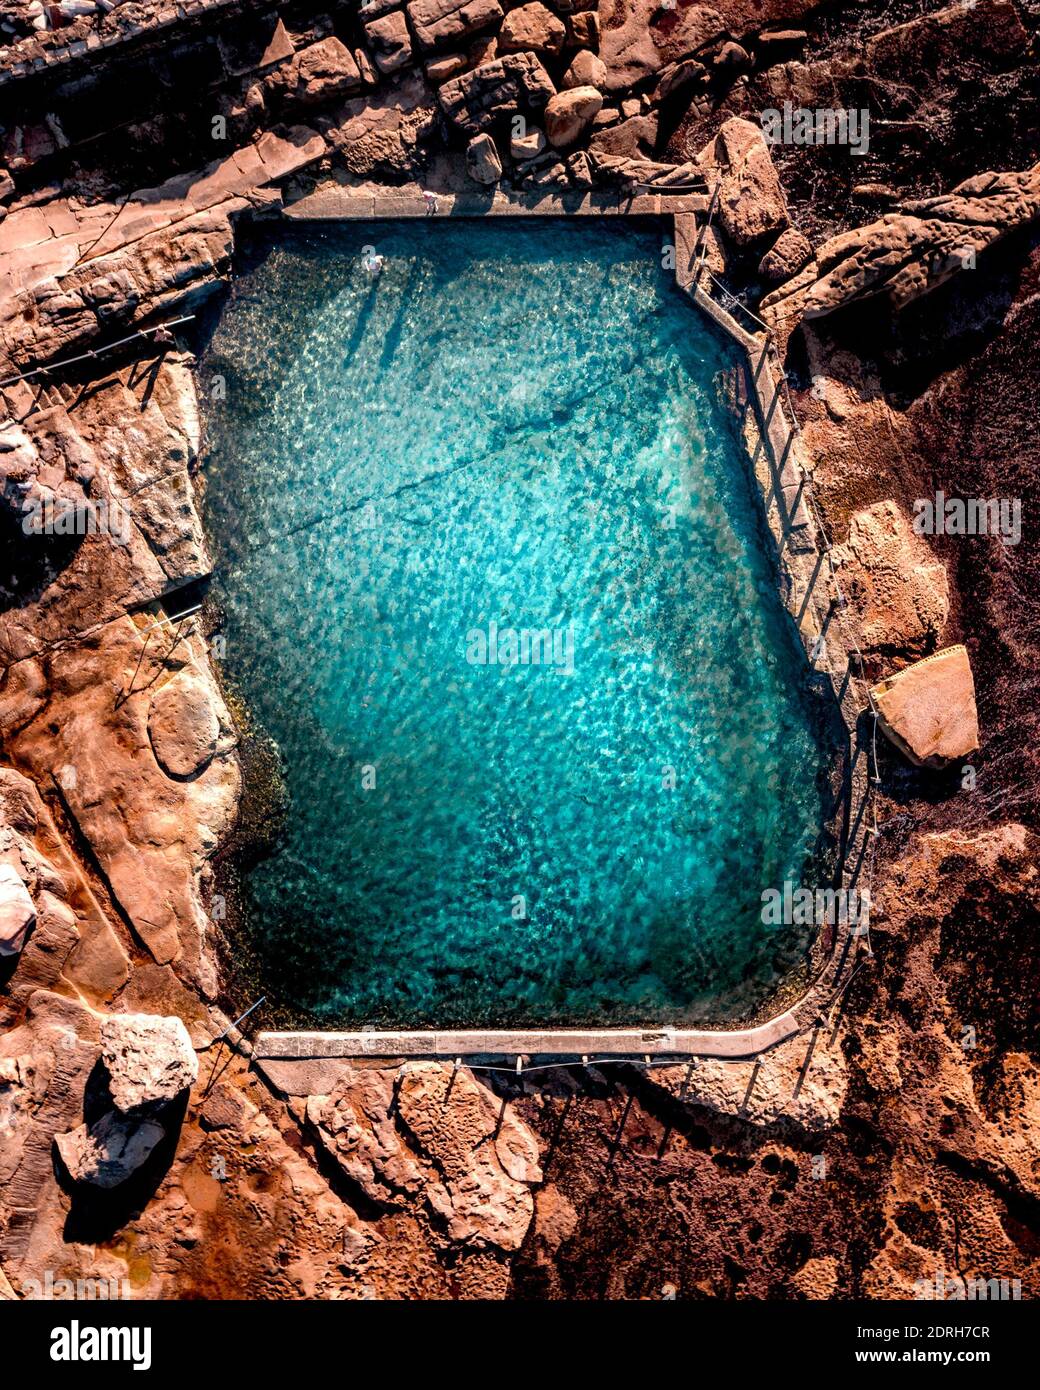 Directly Above Shot Of Swimming Pool Stock Photo